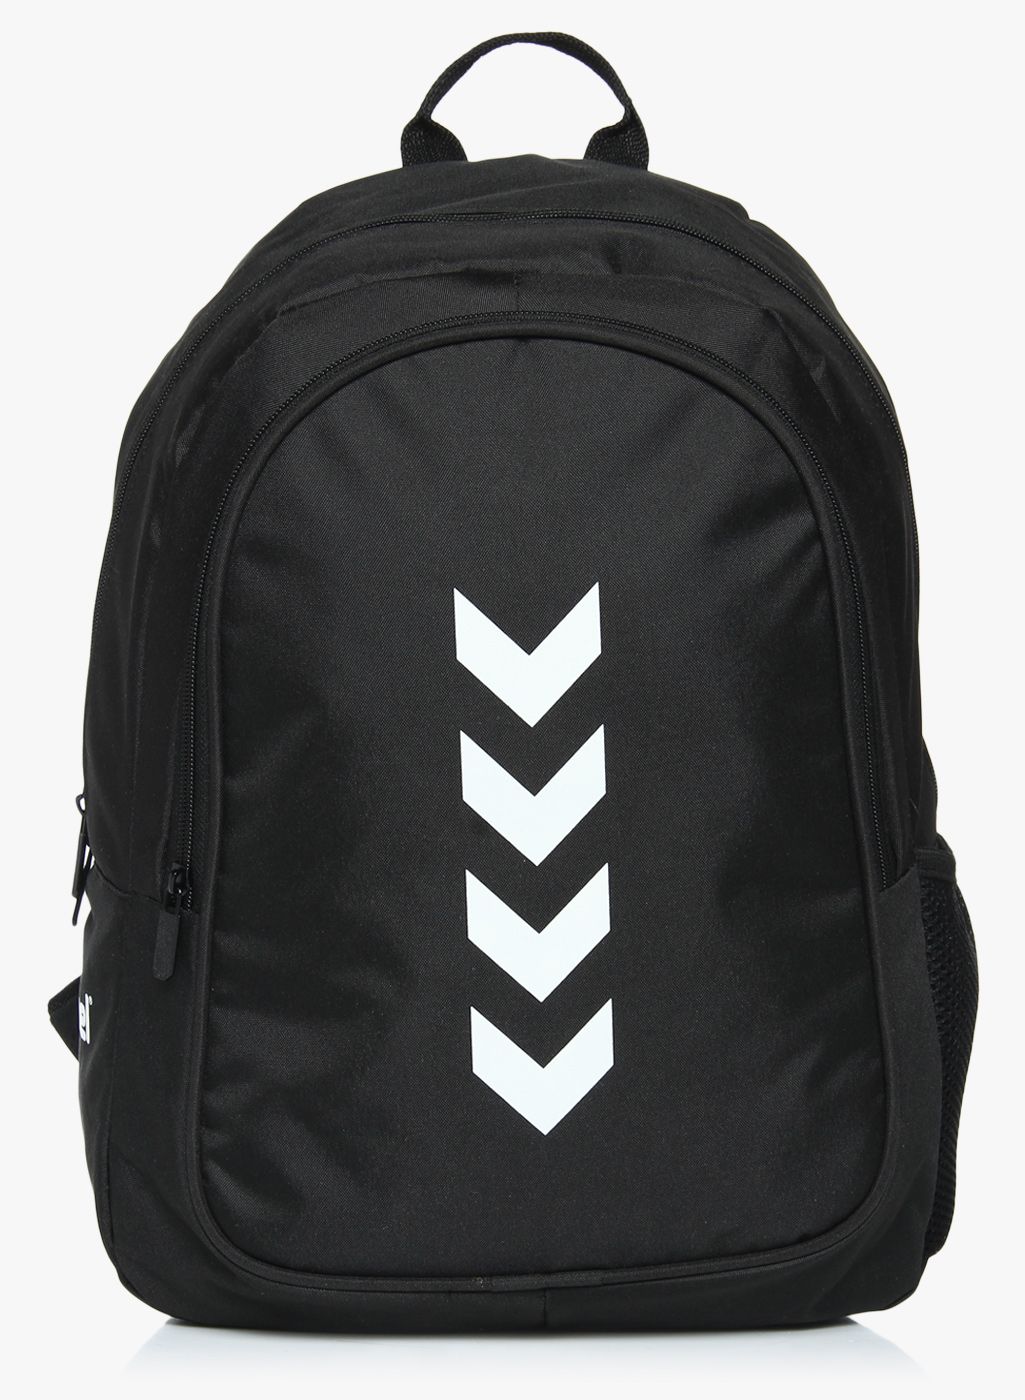 hummel Unisex Black Solid Backpack Price in India